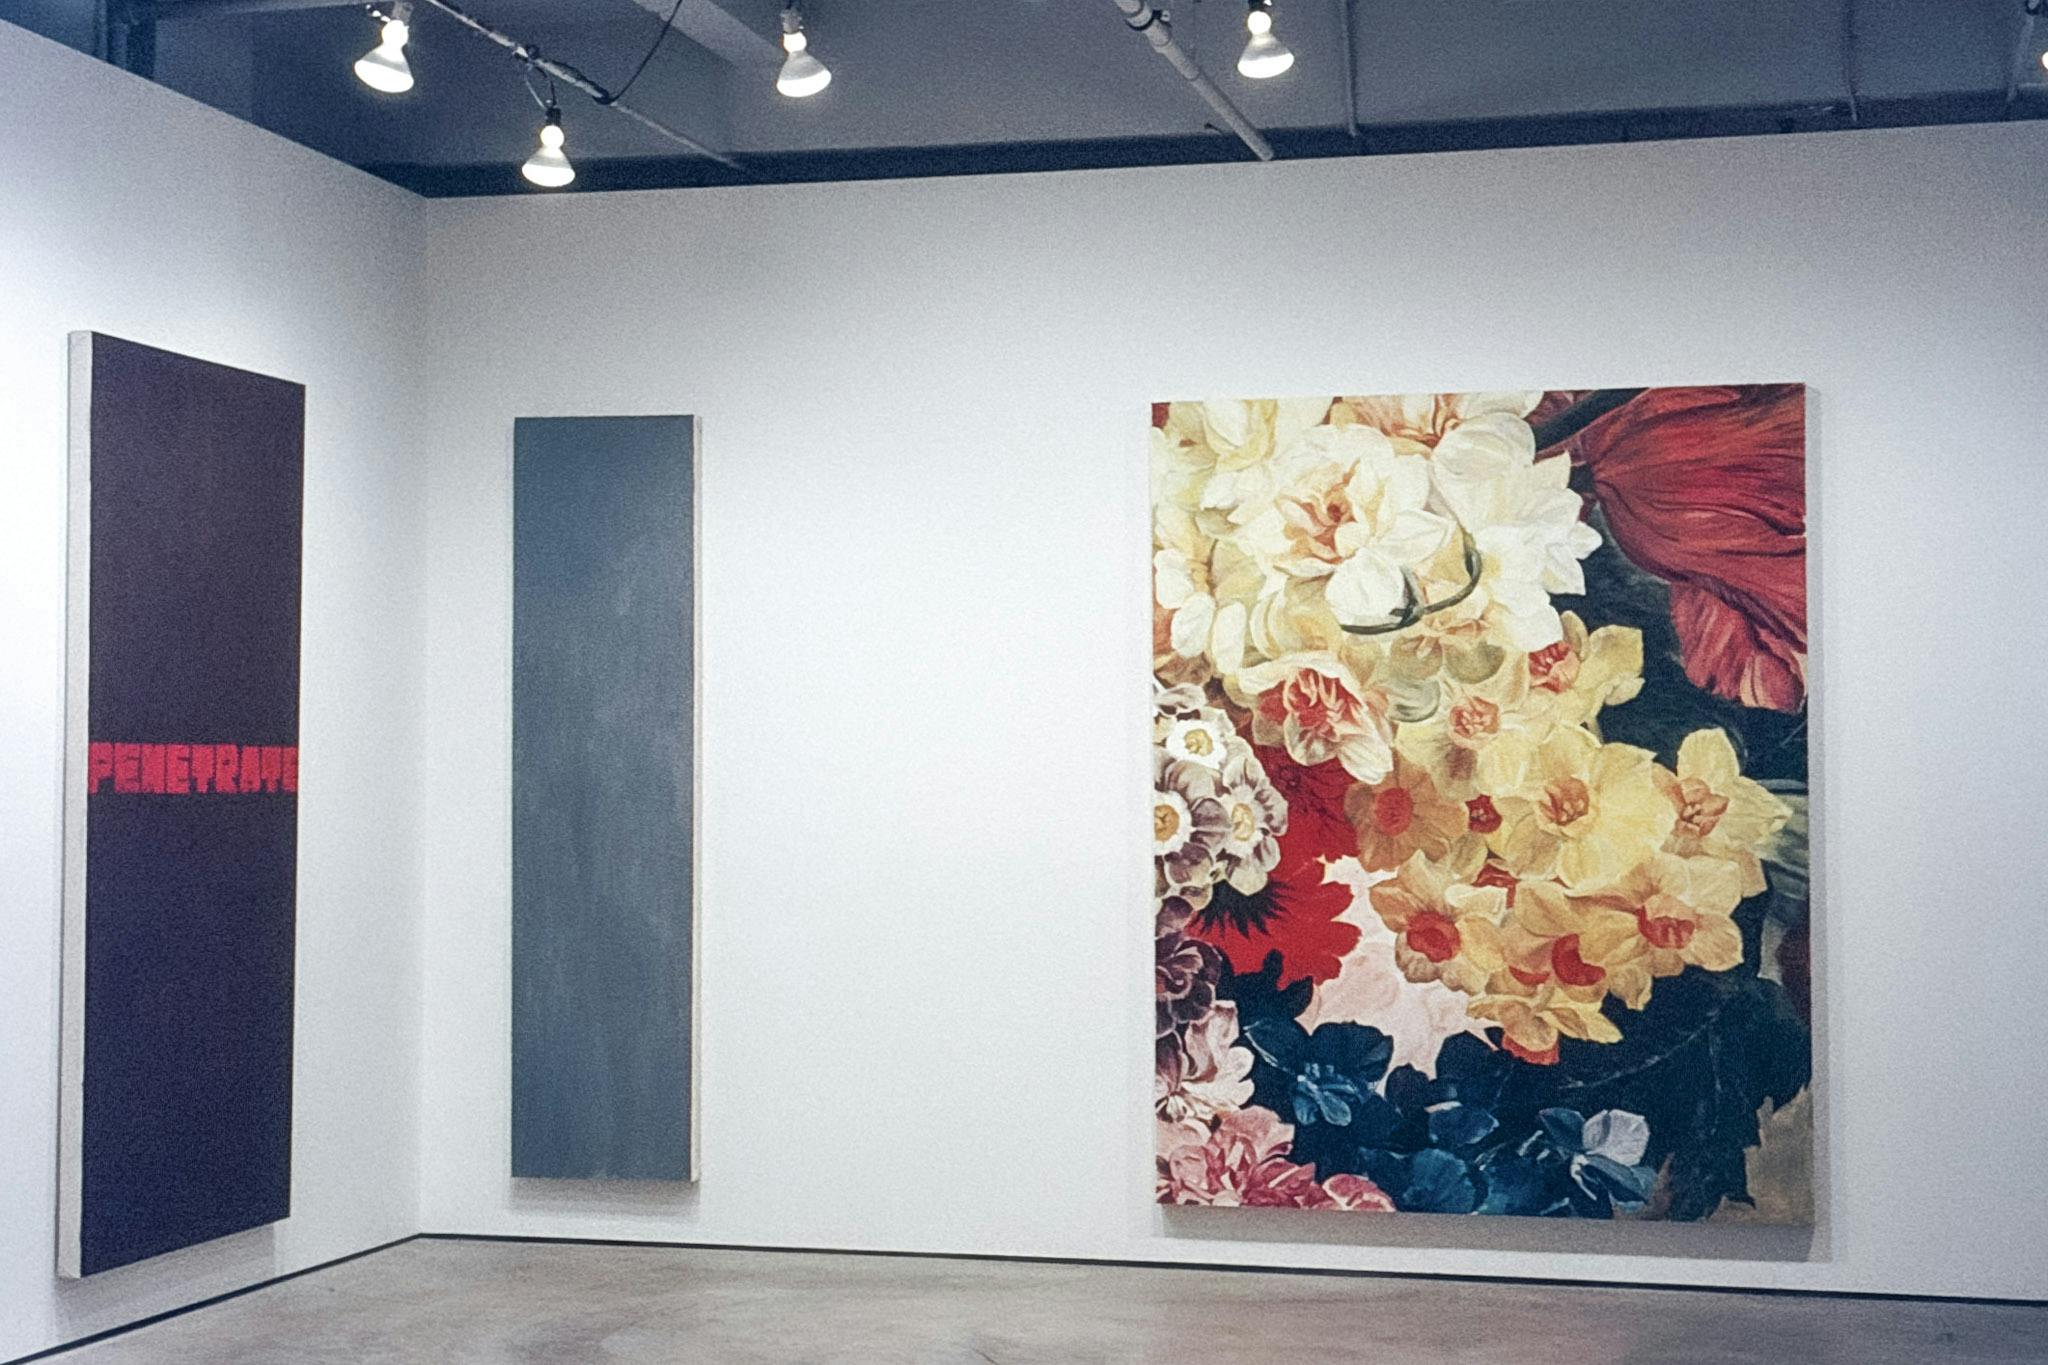 Three vertical paintings in a gallery. One painting has a dark background and the word "penetrate" written across in red, one painting is grey-blue and one shows various flowers, including daffodils.